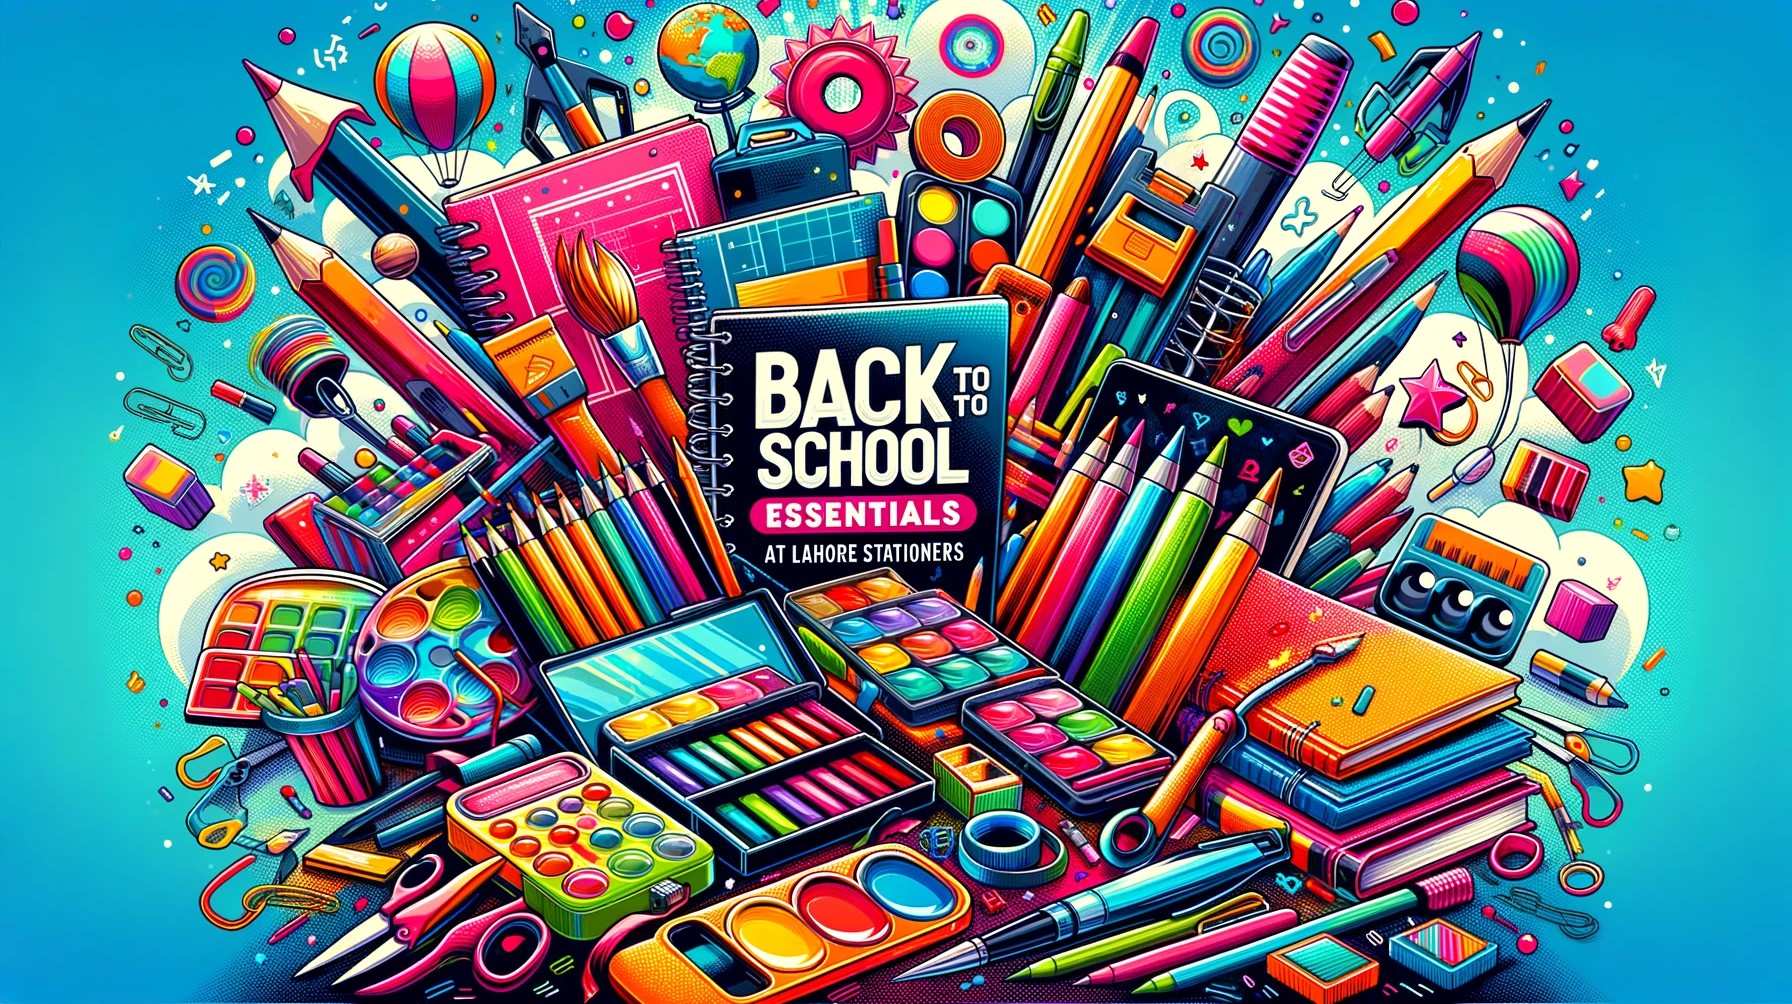 Back to School Essentials: Stationery Items at Lahore Stationers